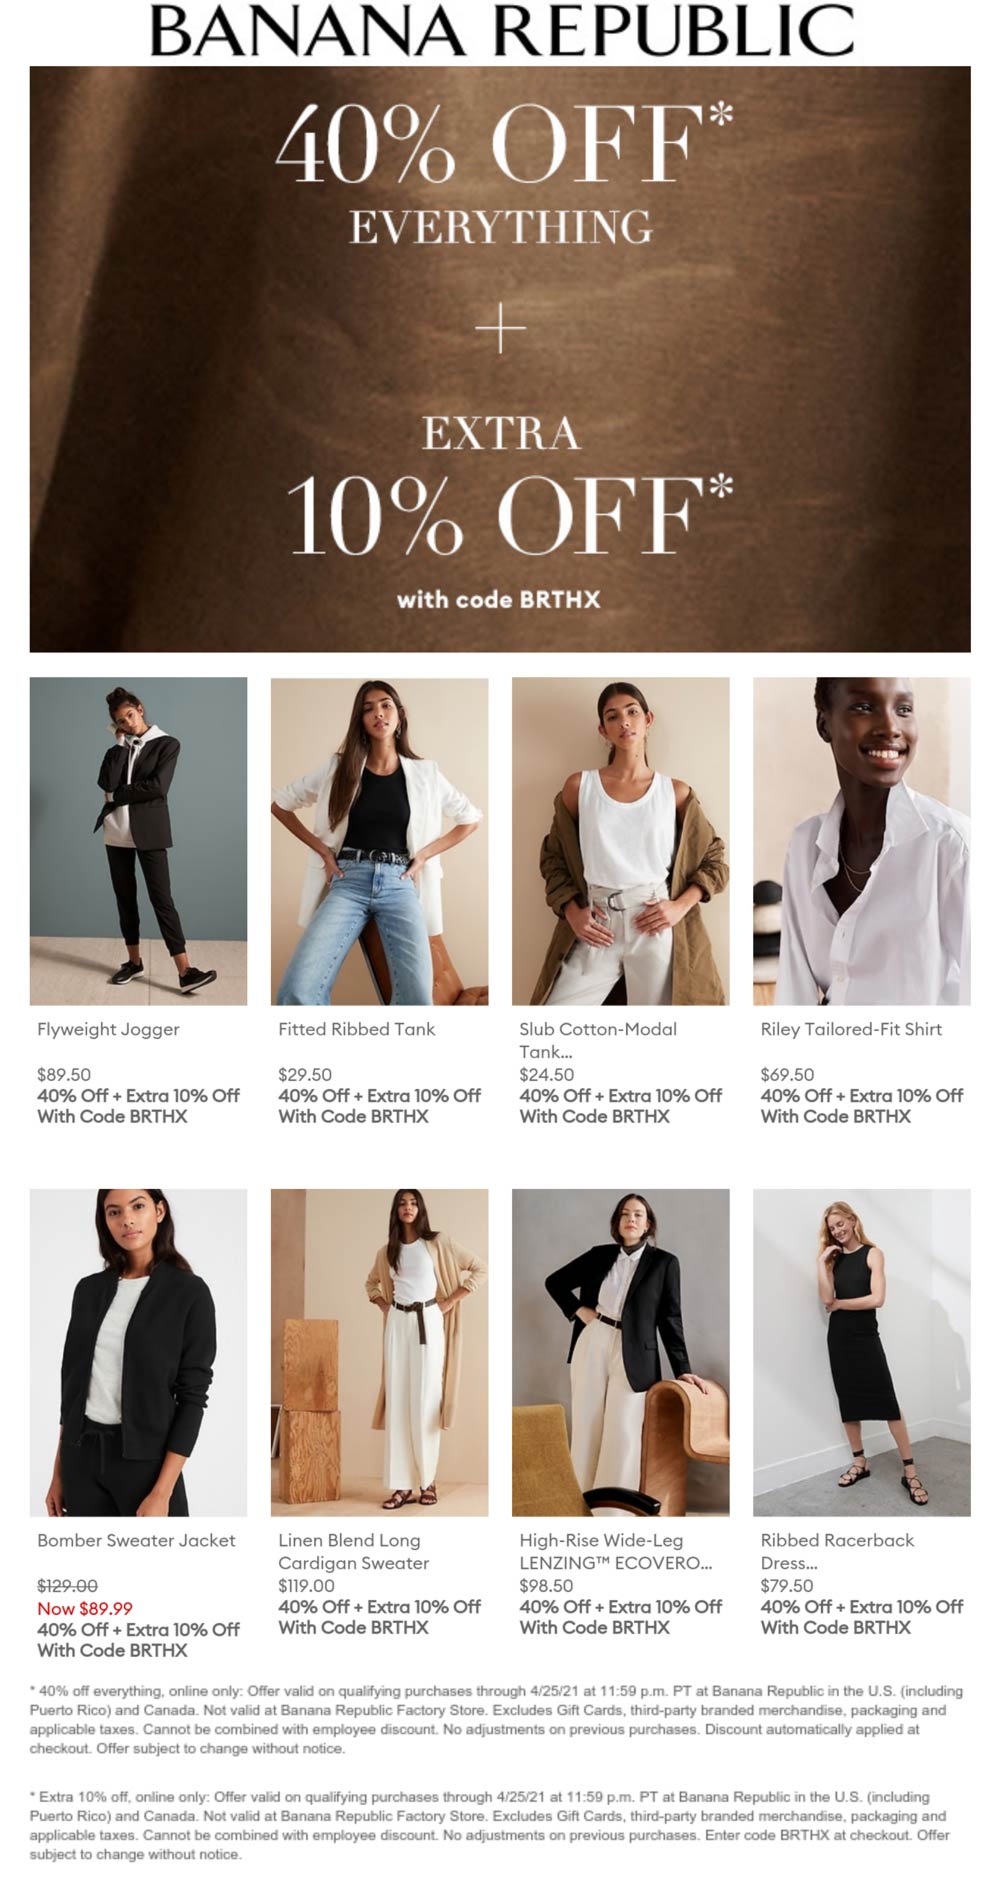 50 off everything today at Banana Republic, or online via promo code